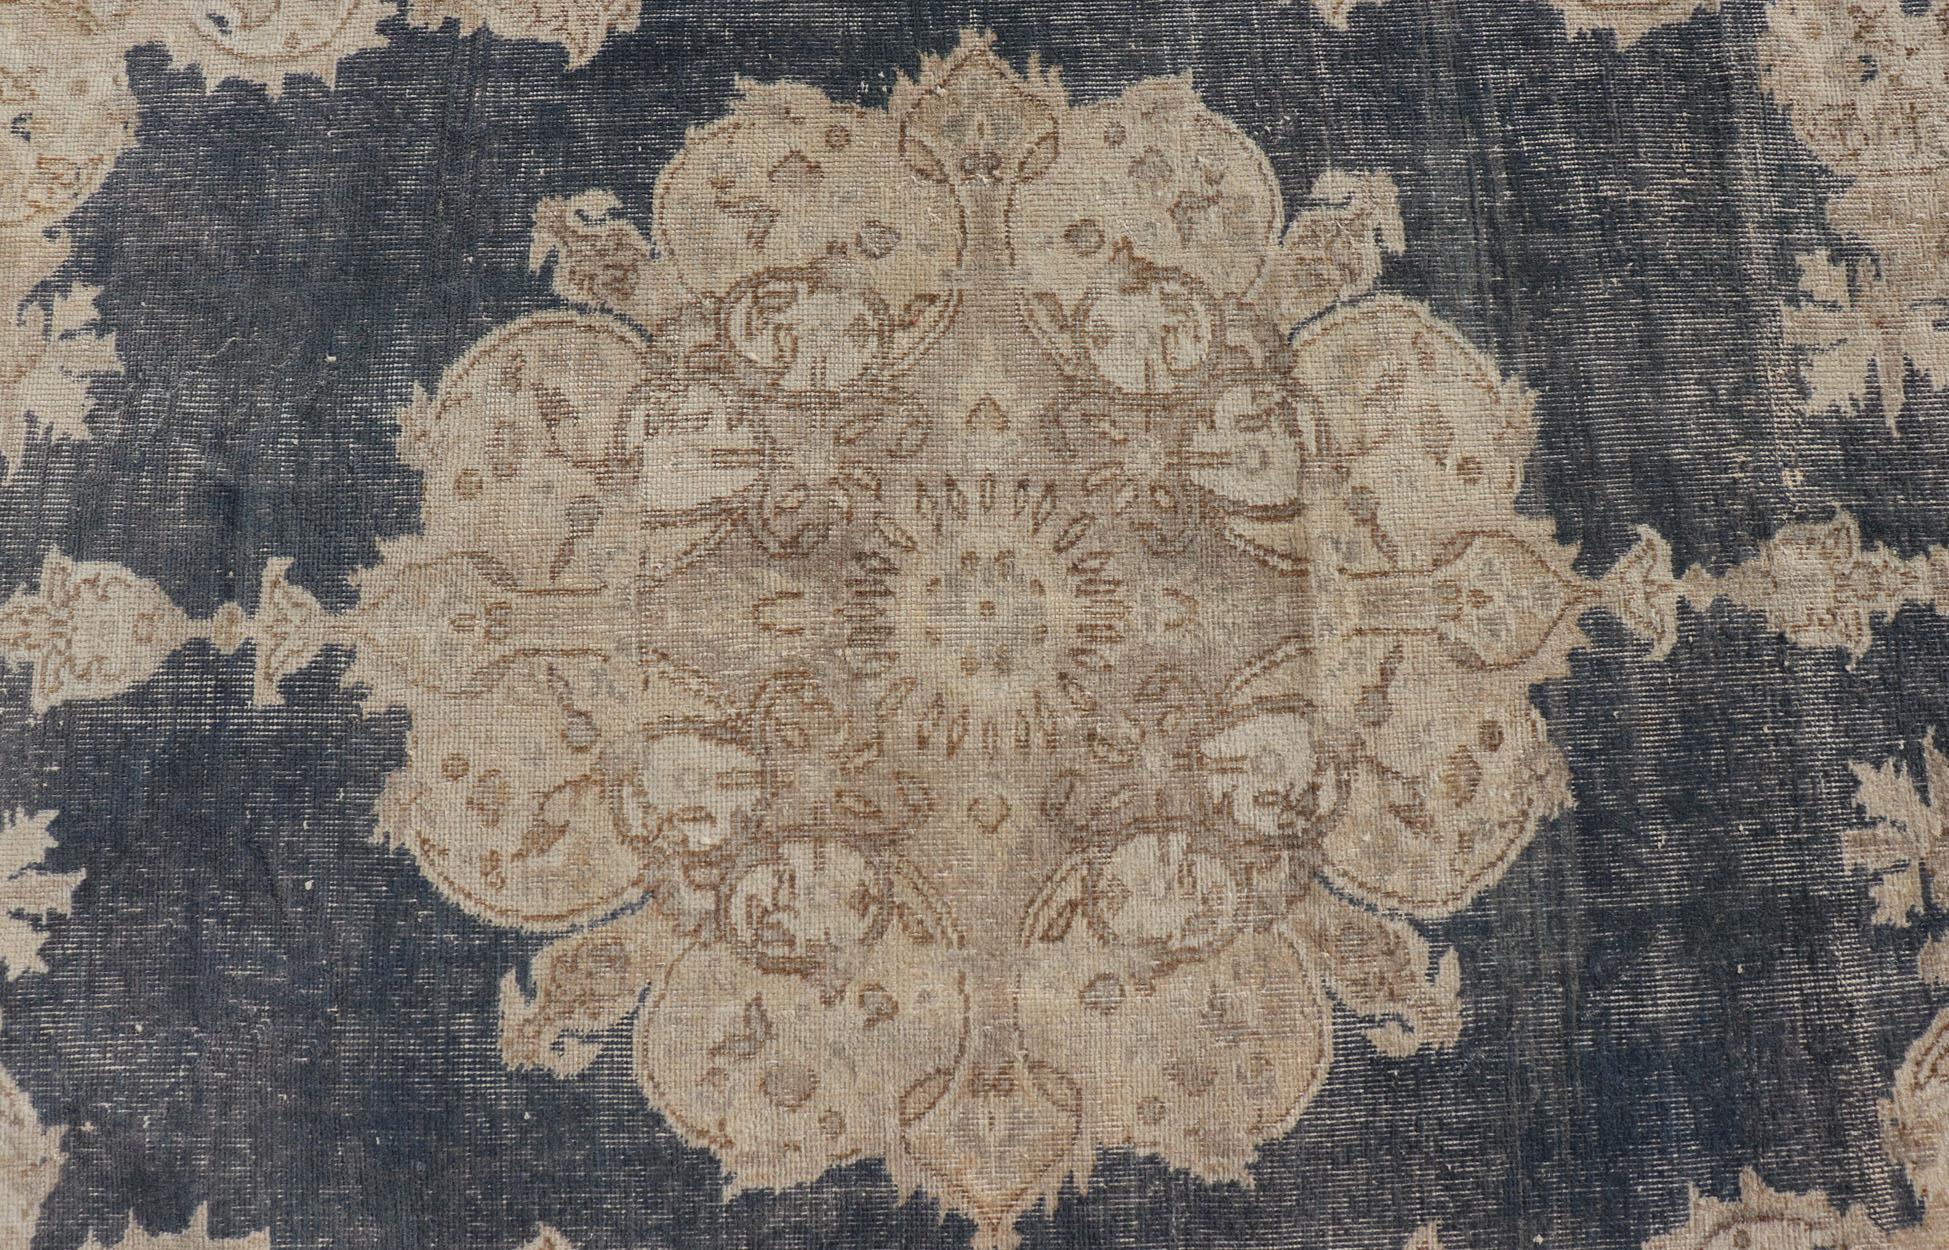 Distressed Turkish Carpet with Floral Design in Blue, Tan, Taupe, and Cream For Sale 2